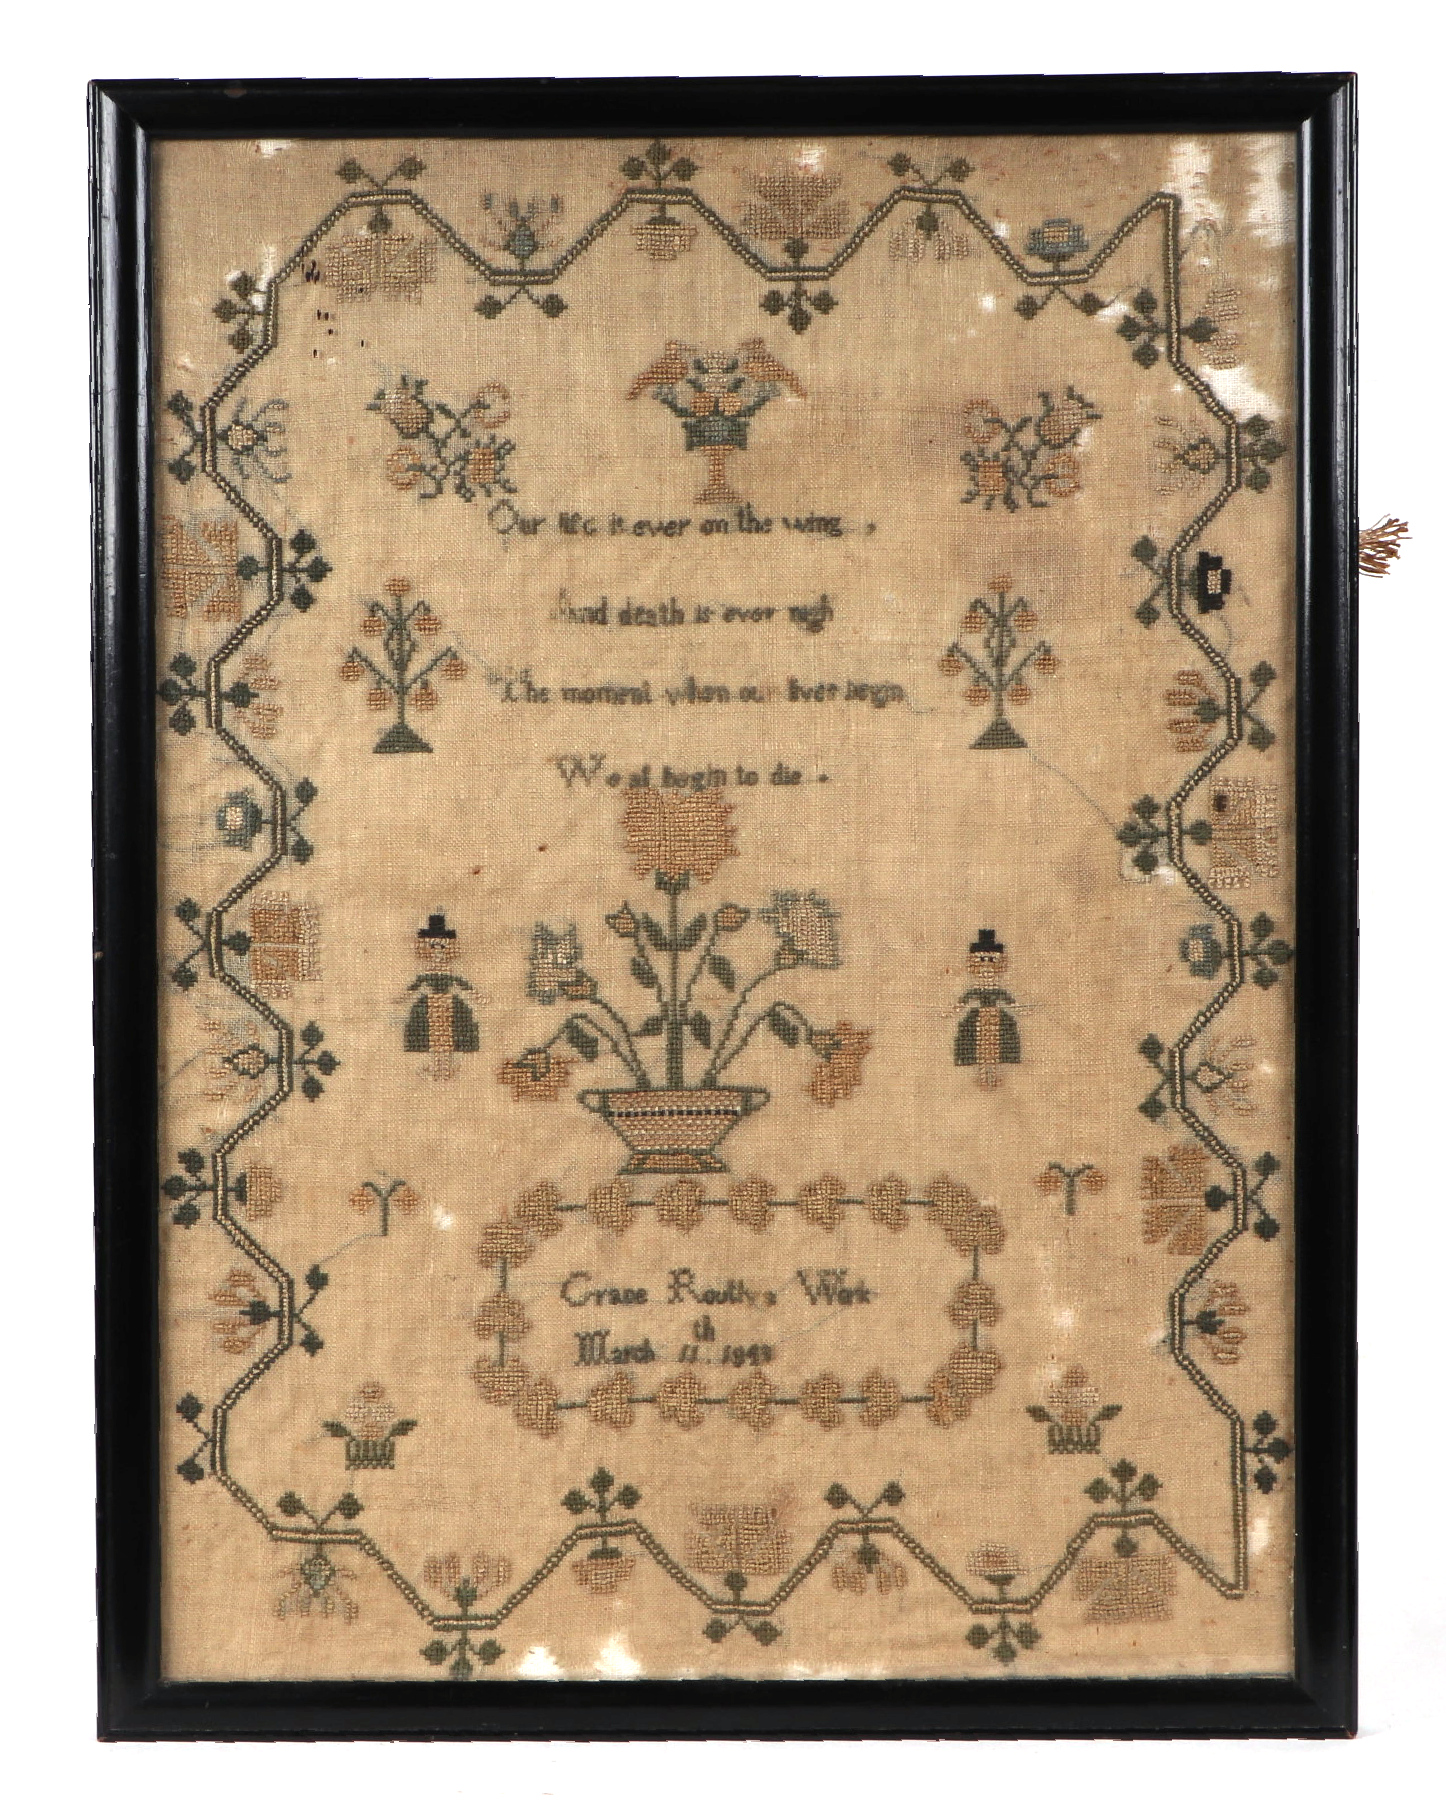 A George IV sampler with verse and figures within a meandering boarder, by Grace Routh (March 11th - Image 2 of 7